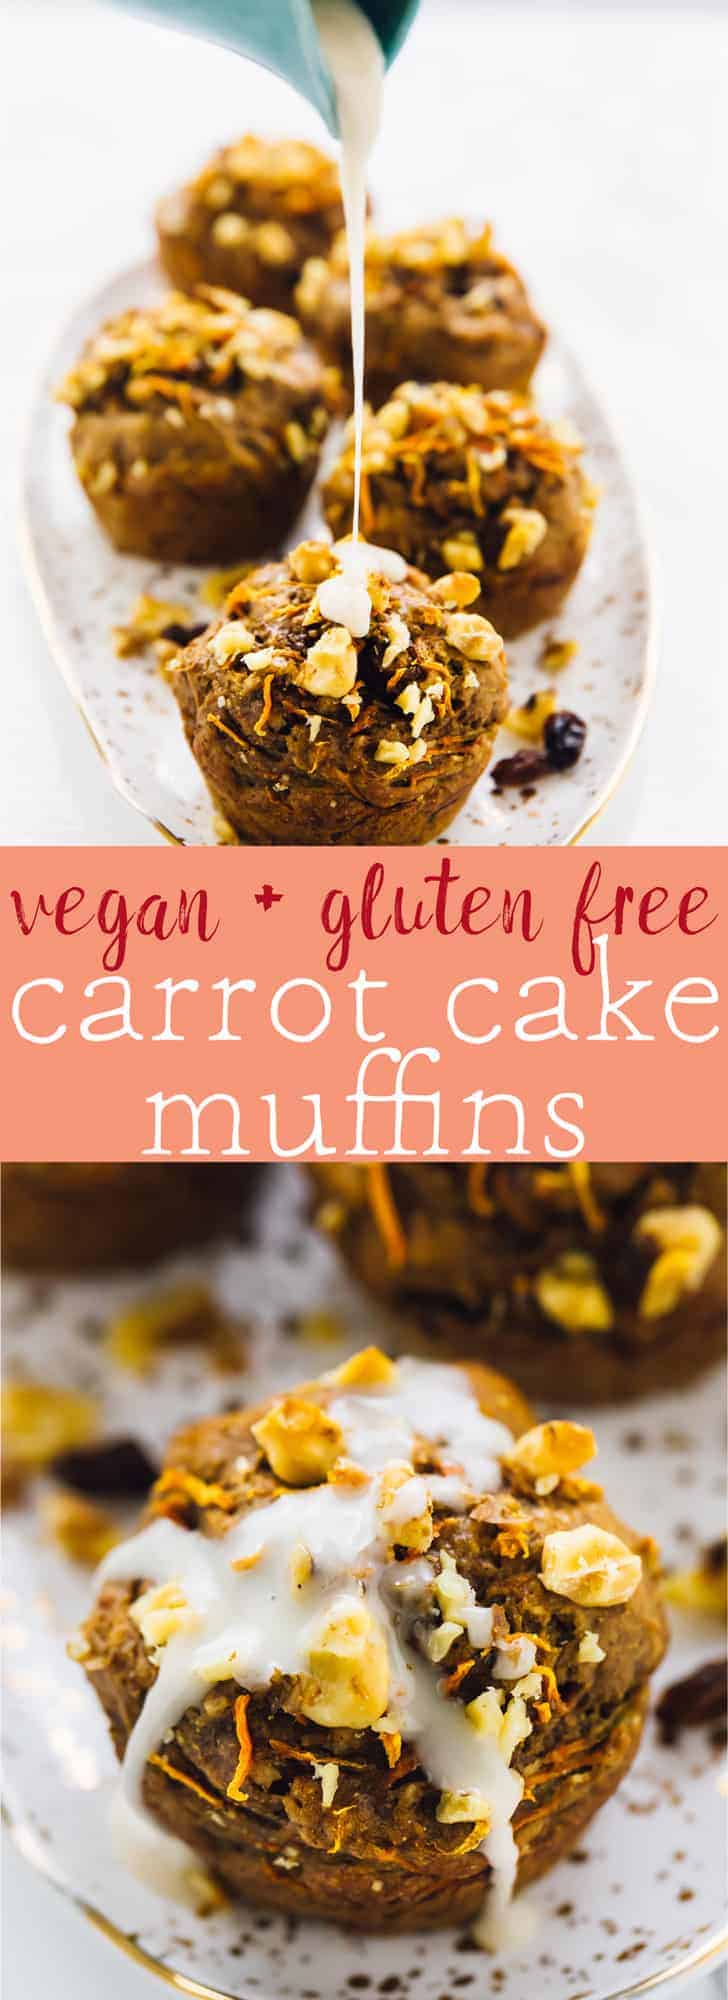 These Carrot Cake Muffins bake up in just 30 minutes and are absolutely fantastic! They are moist, delectable and vegan and gluten free! via https://jessicainthekitchen.com